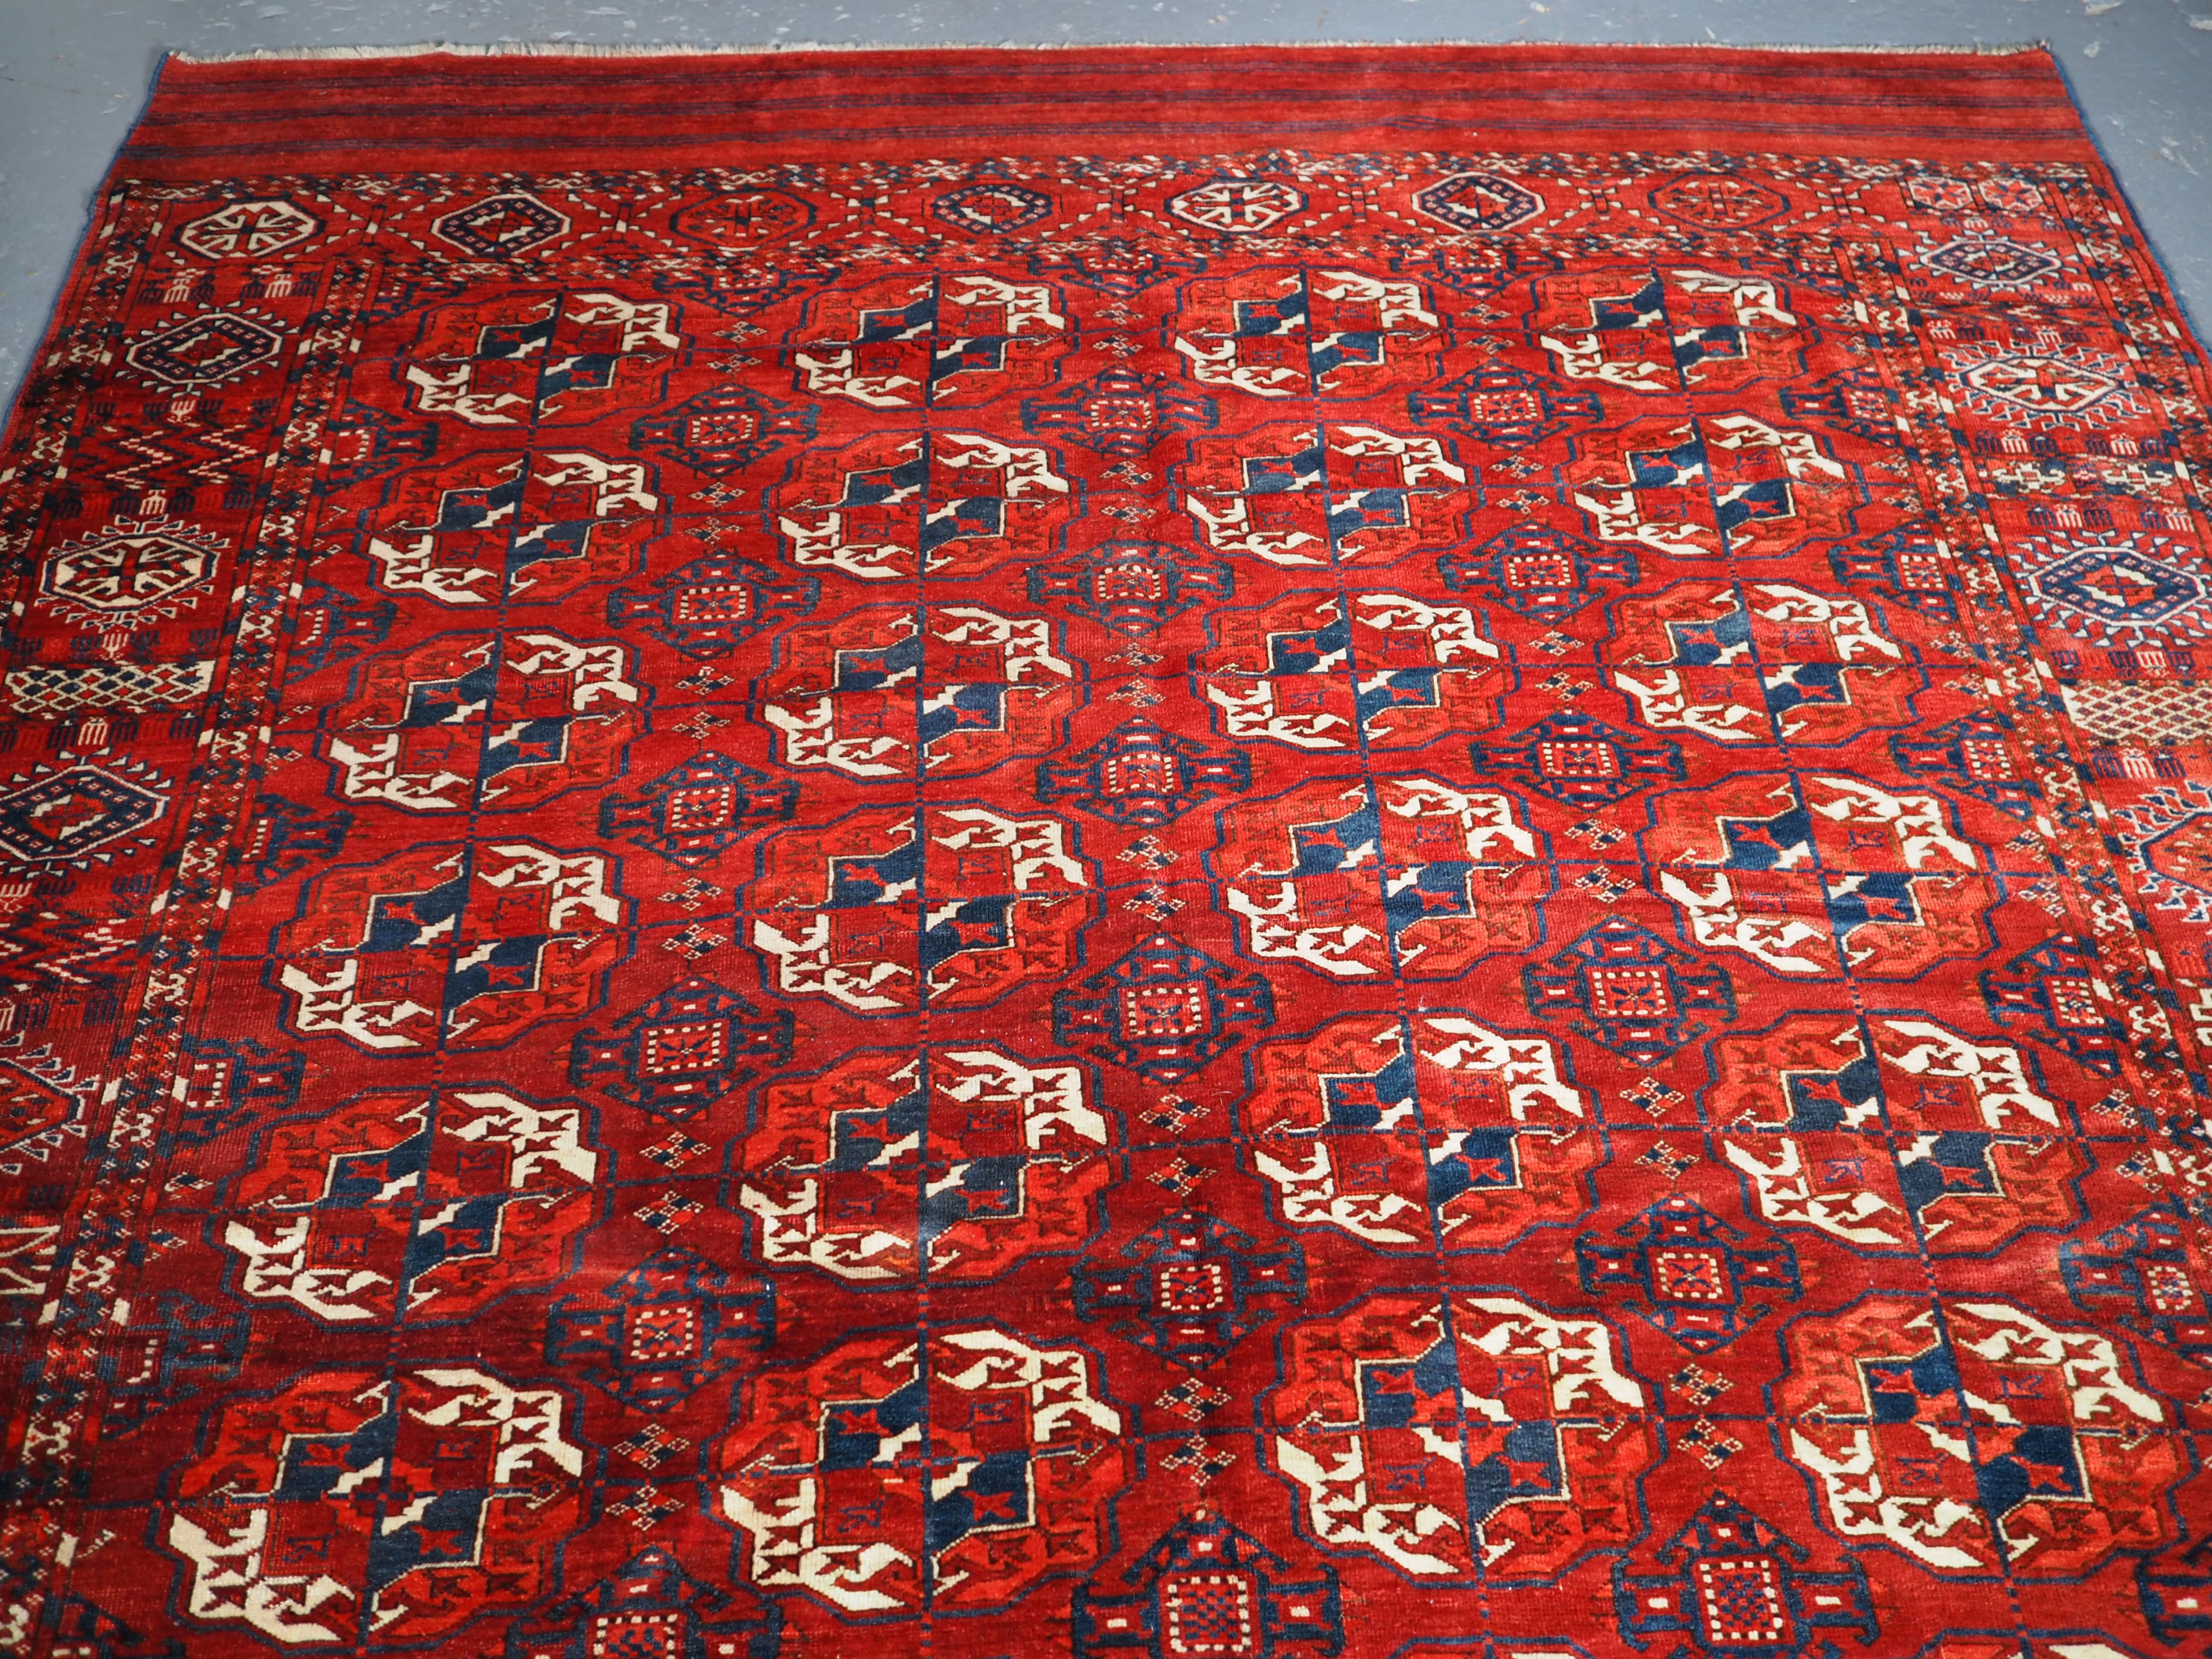 An excellent Tekke Turkmen main carpet of small room size. The clear madder red field has well drawn large round Tekke guls. The border is of the sunburst and octogen design. Note the piled elem panels at each end with a simple stripe design.

The